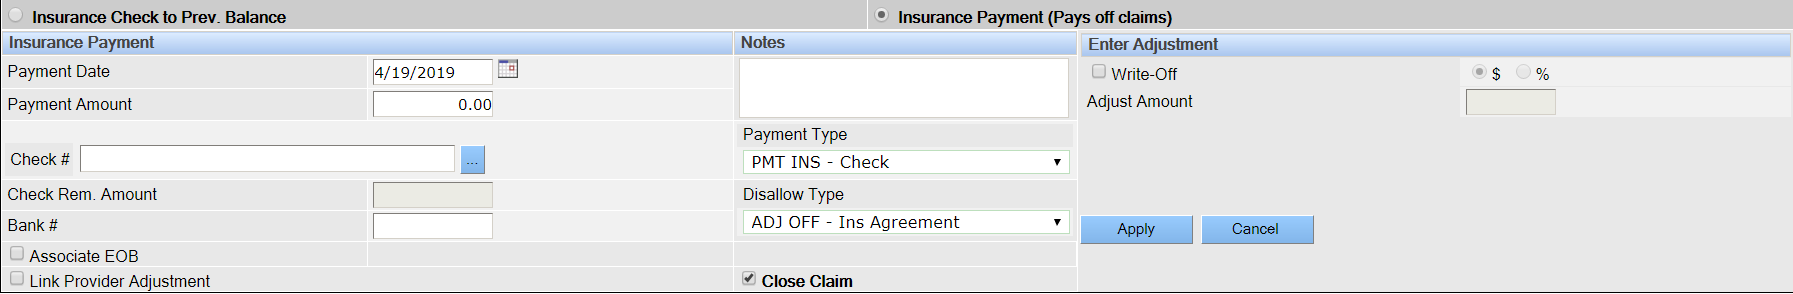 Insurance Payment to